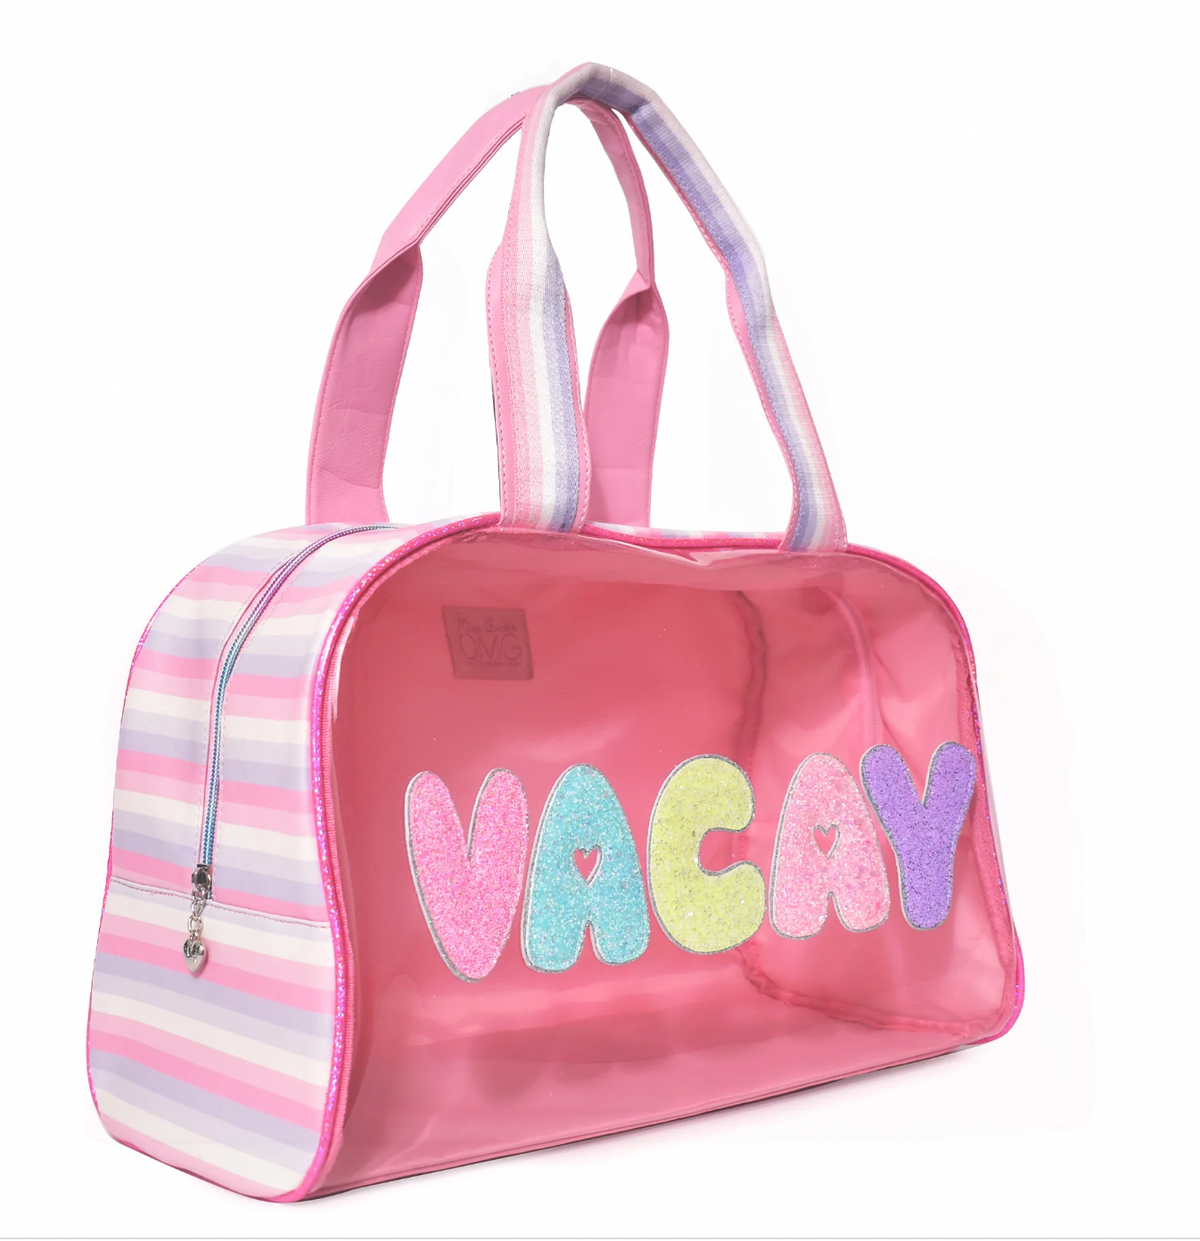 Glam Embroidered Letter Duffle Bag - Bubble Gum Vacay